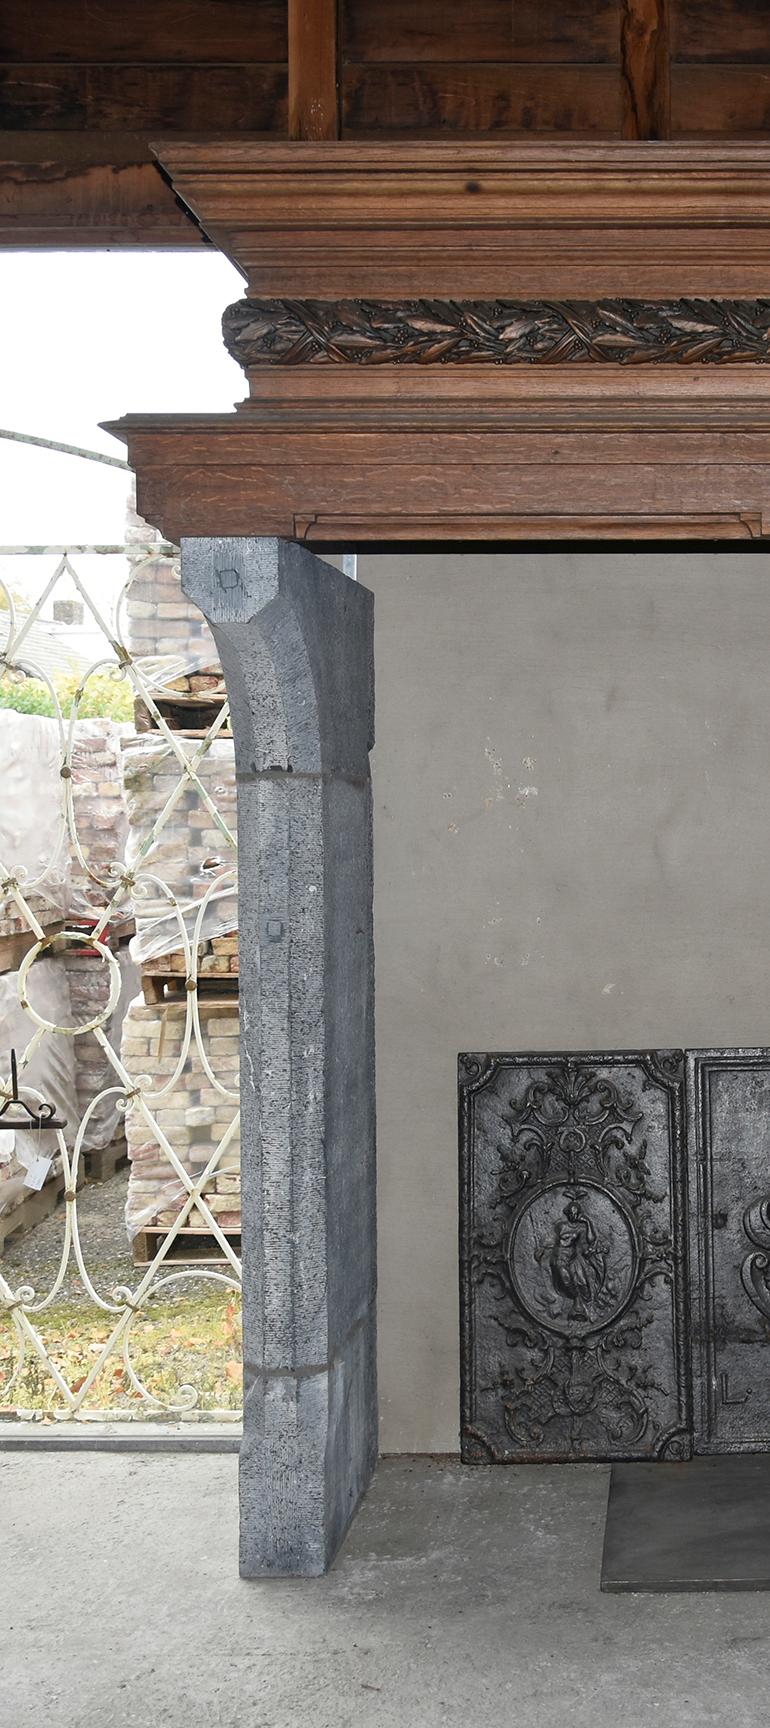 Antique bluestone fireplace mantel with wooden mantel from the 19th century,
from Belgium, to place around the chimney.